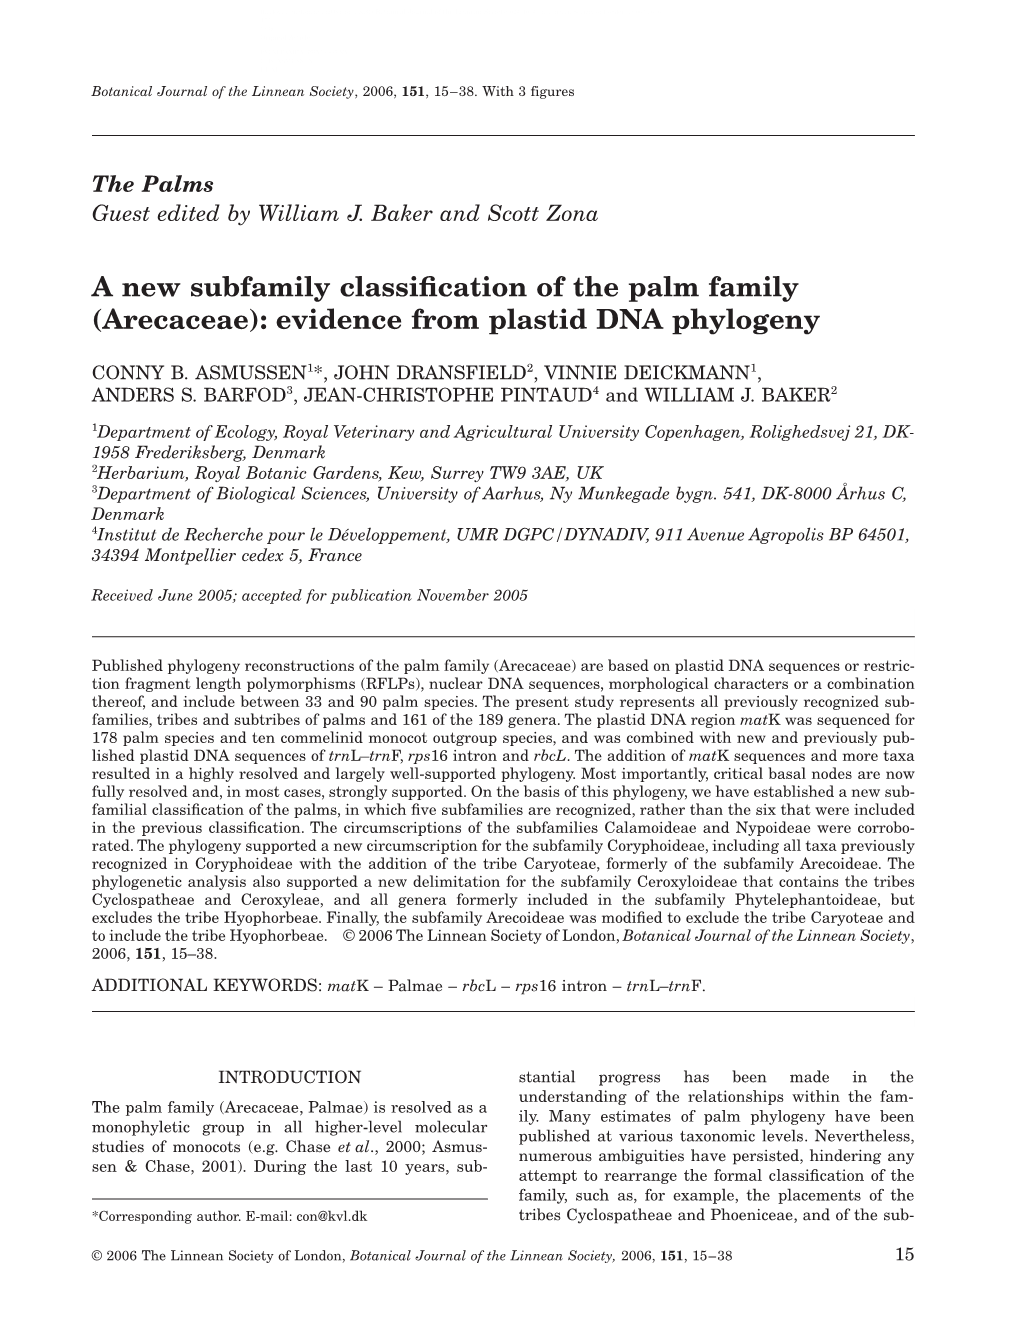 A New Subfamily Classification of the Palm Family (Arecaceae)